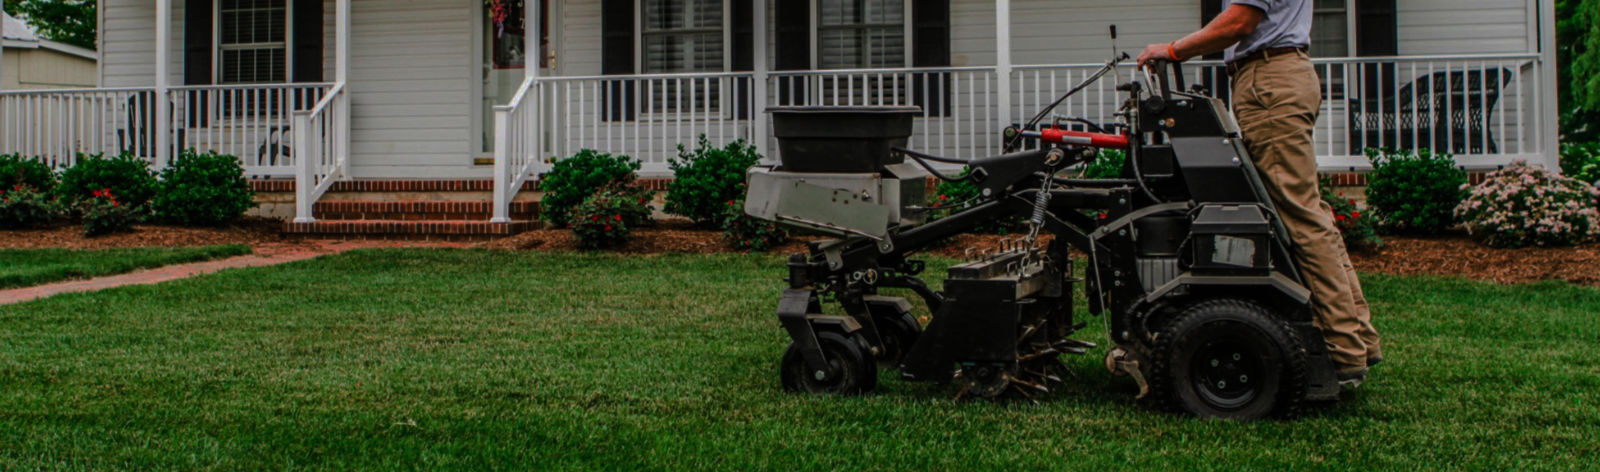 Landscaping Services in Oswego Illinois